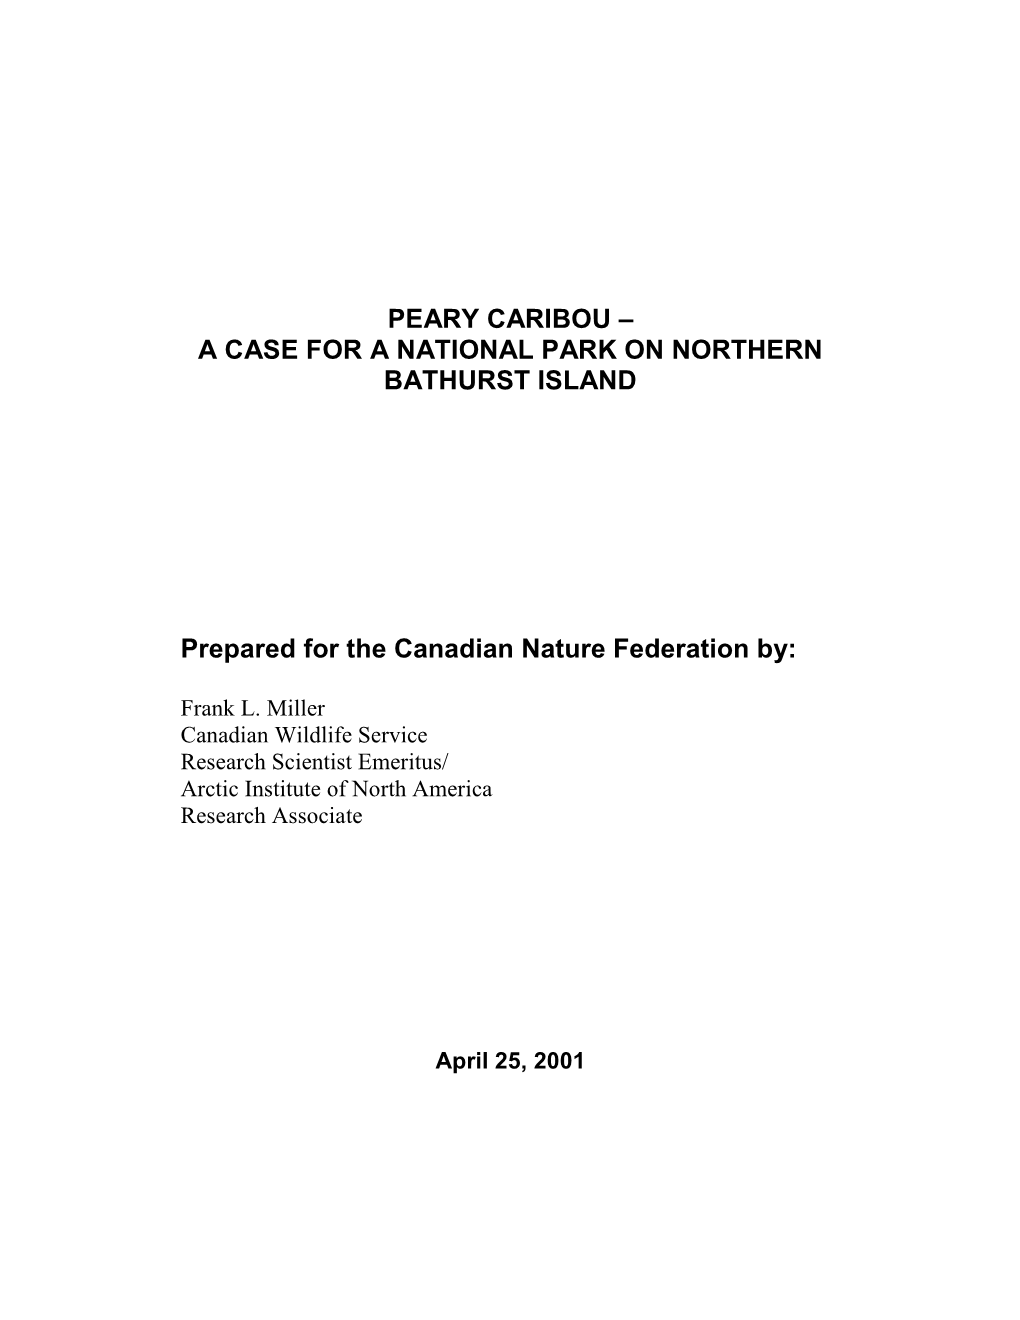 Peary Caribou – a Case for a National Park on Northern Bathurst Island